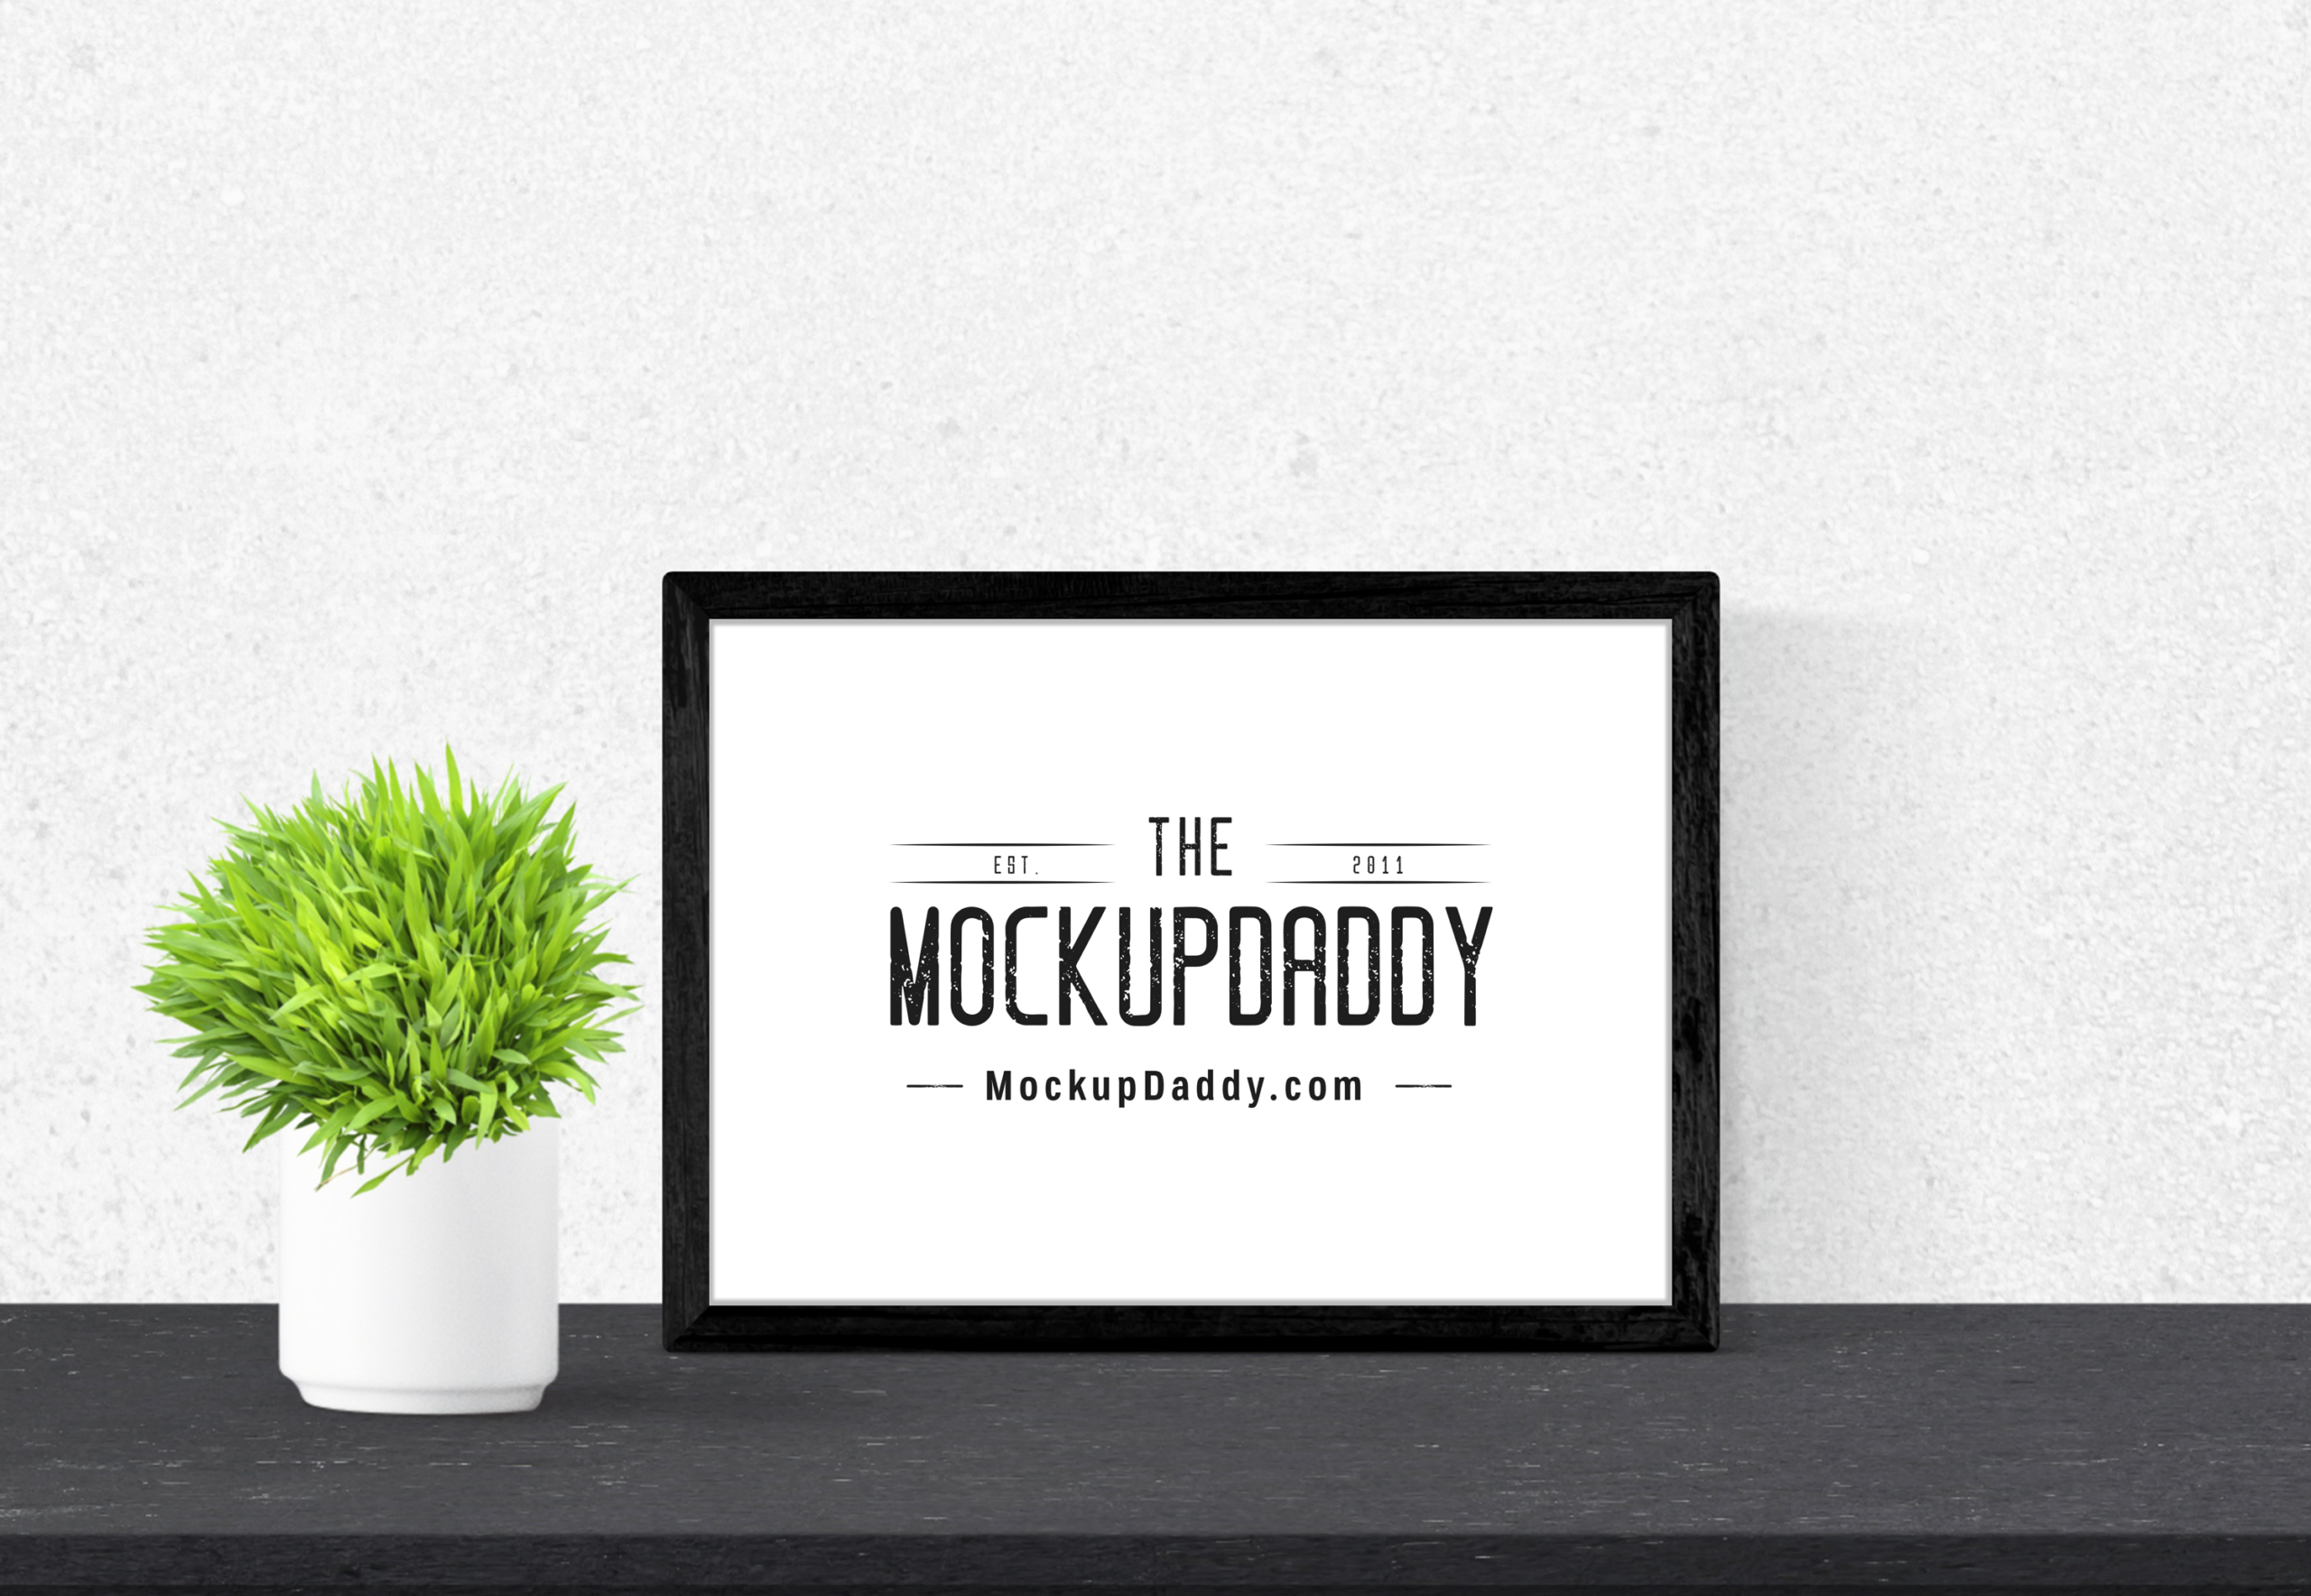 Download Free Frame on Table Psd Mockup - Mockup Daddy